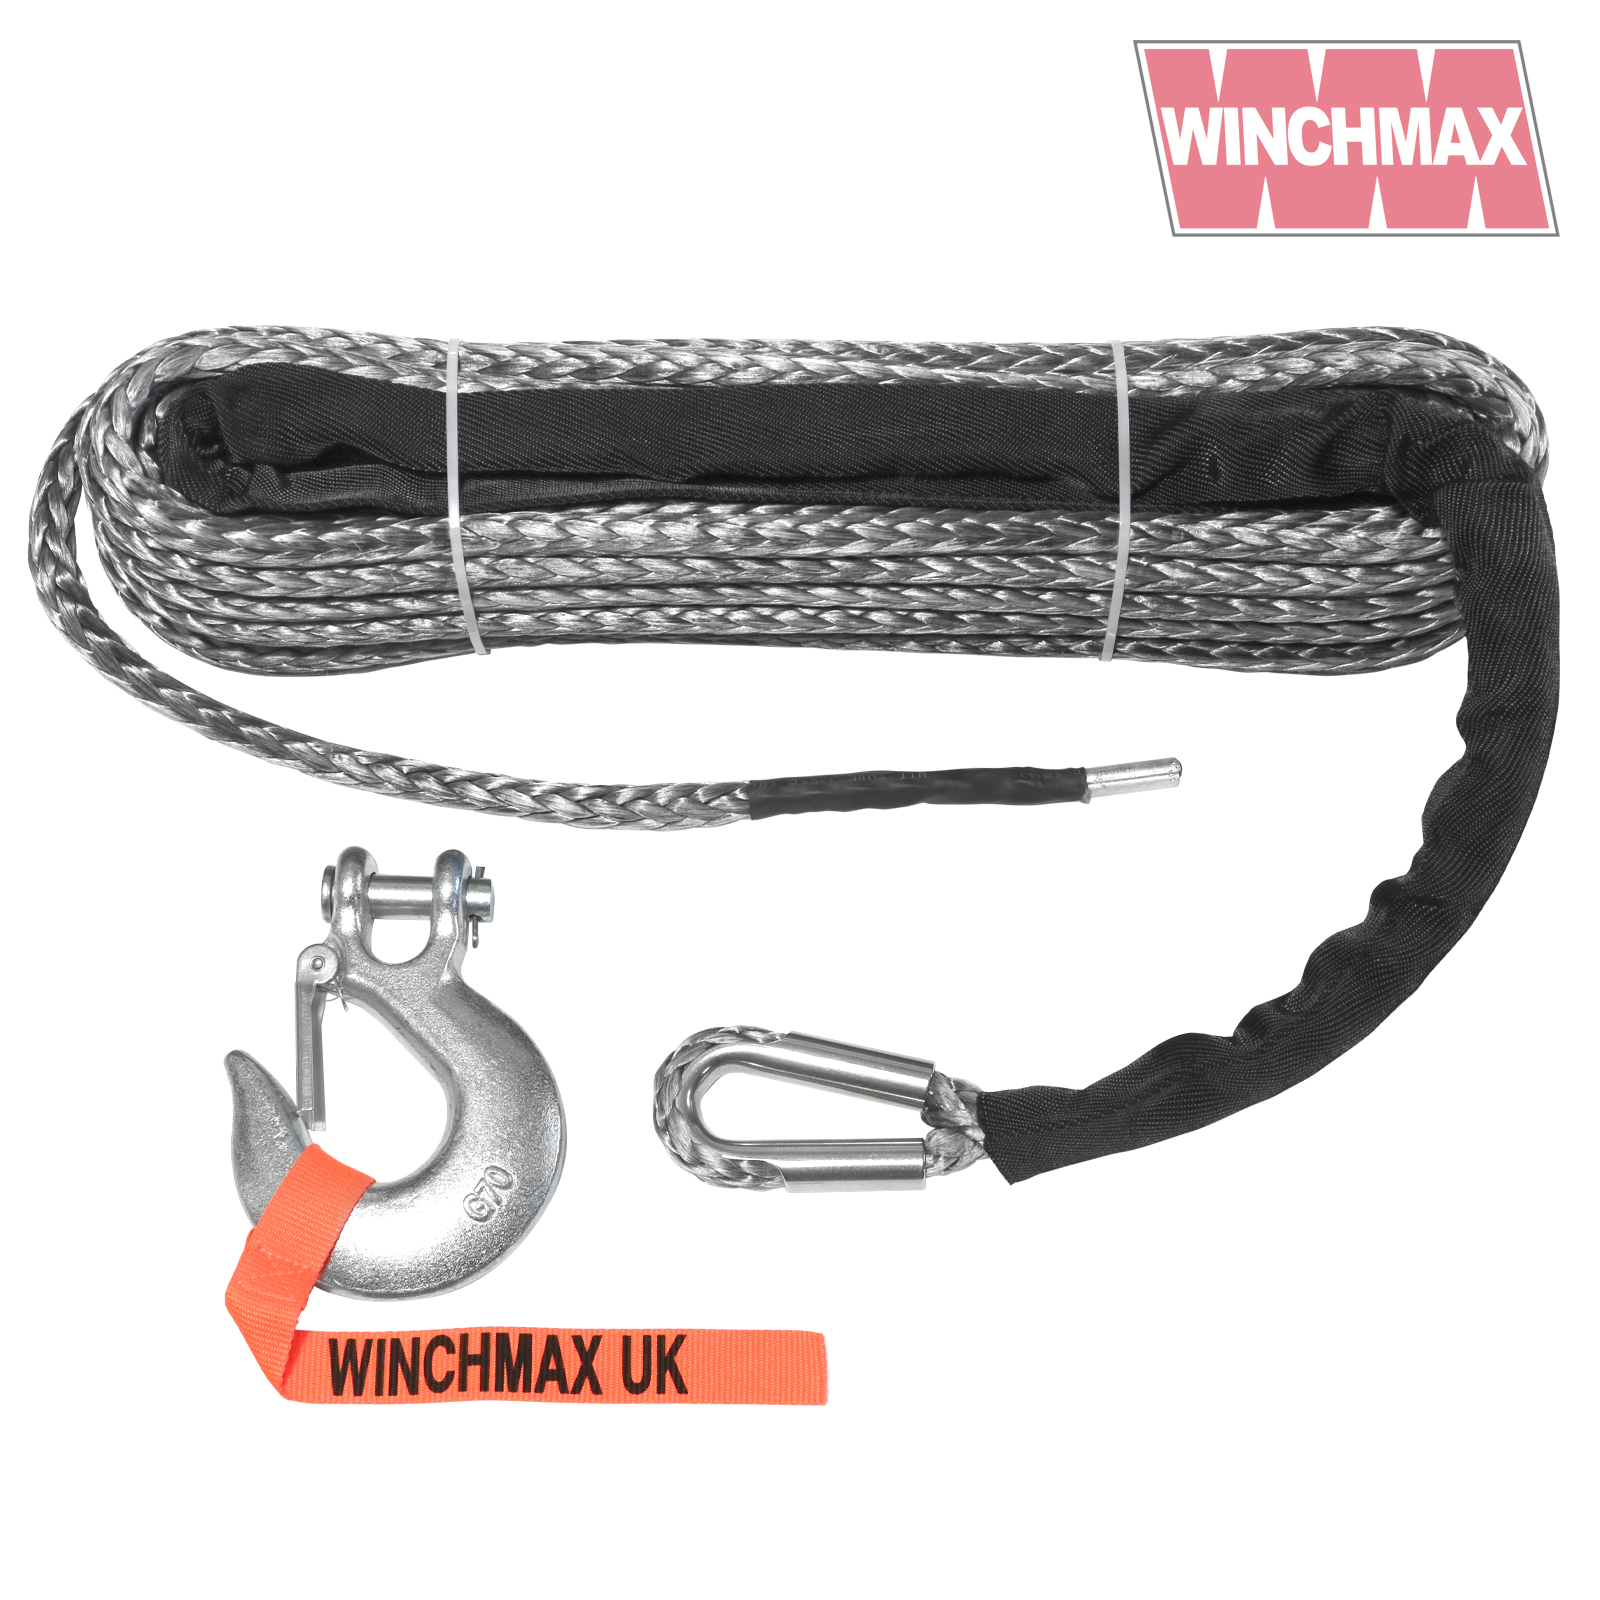 Premium Quality Synthetic Winch Rope 25m x 13mm, Hole Fix. 1/2